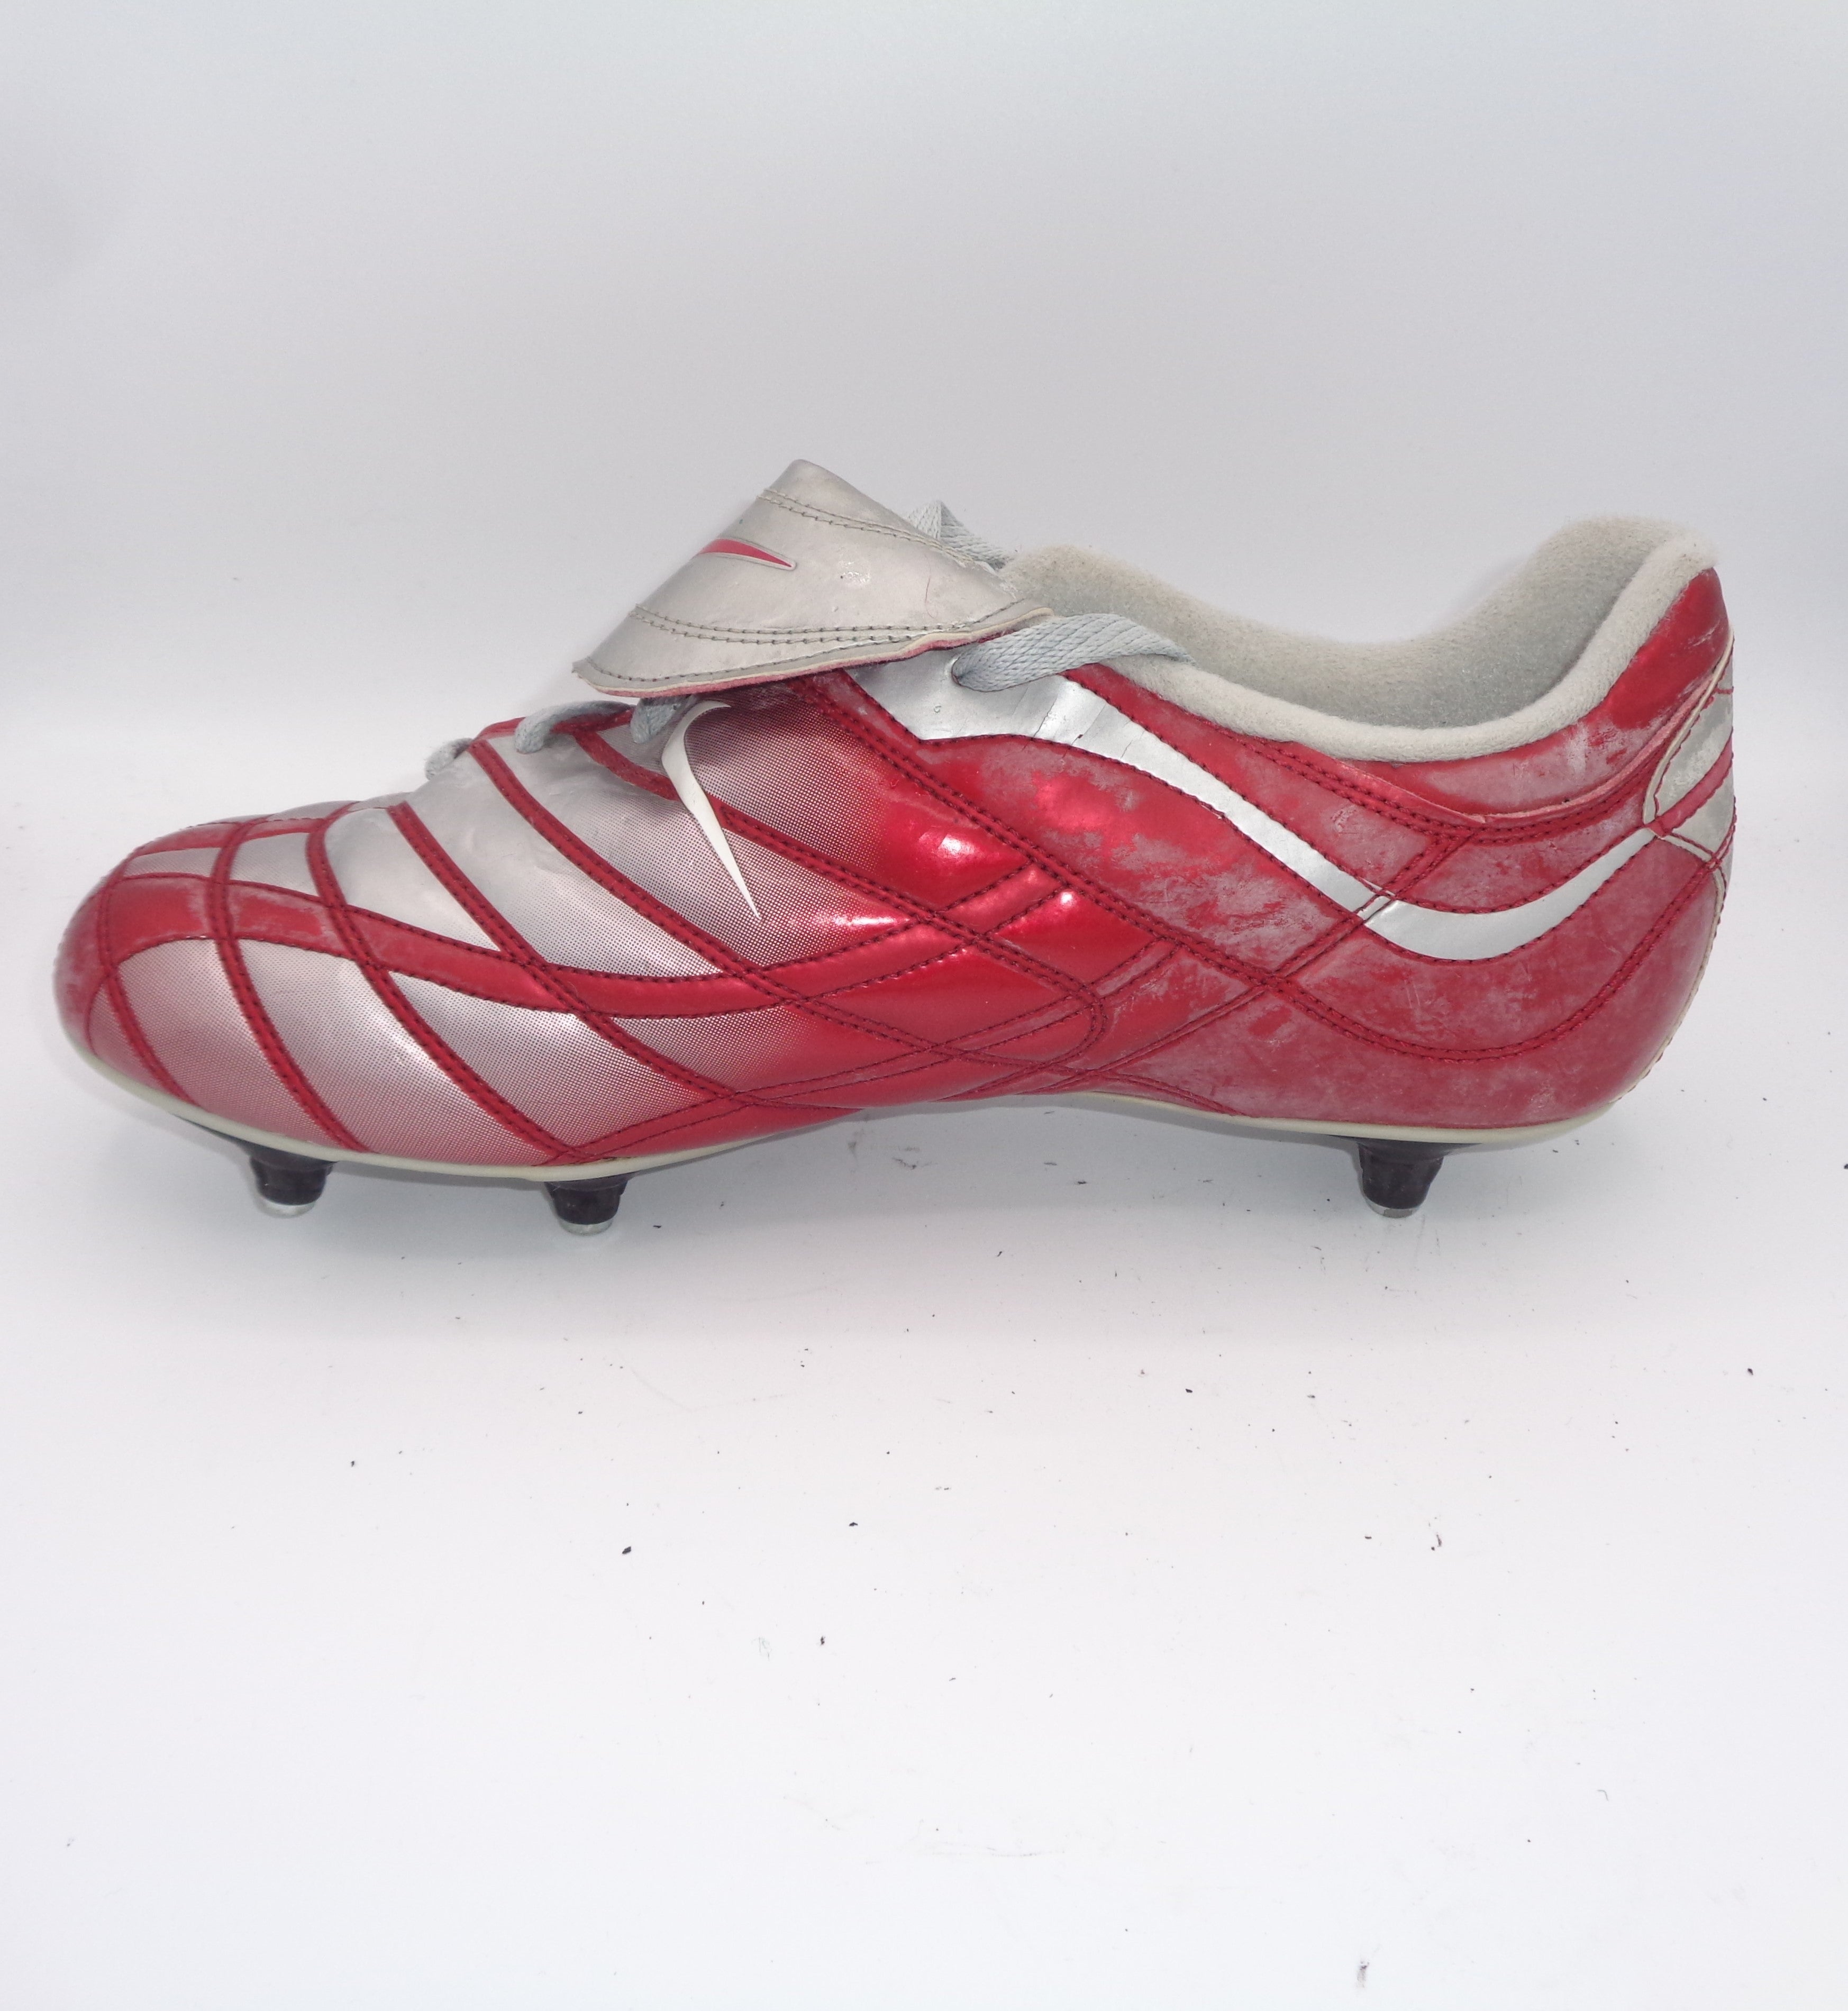 NIKE TOTAL 90 2001 RED FOOTBALL BOOTS - NIKE - T90 - SIZE 9 – HA7 CLASSICAL